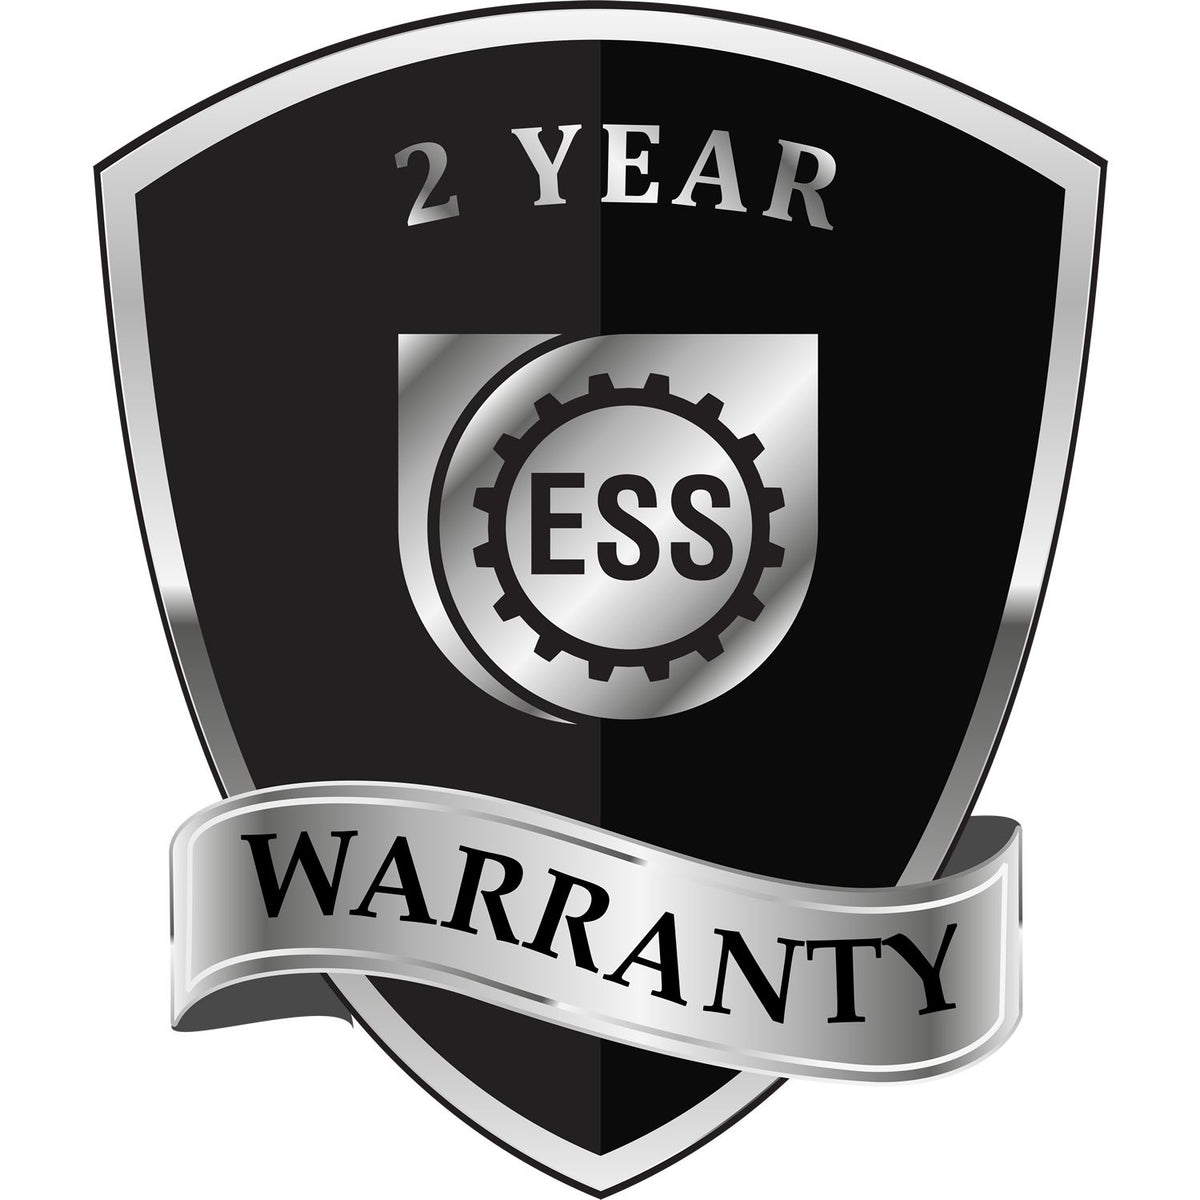 A black and silver badge or emblem showing warranty information for the Handheld Michigan Professional Geologist Embosser